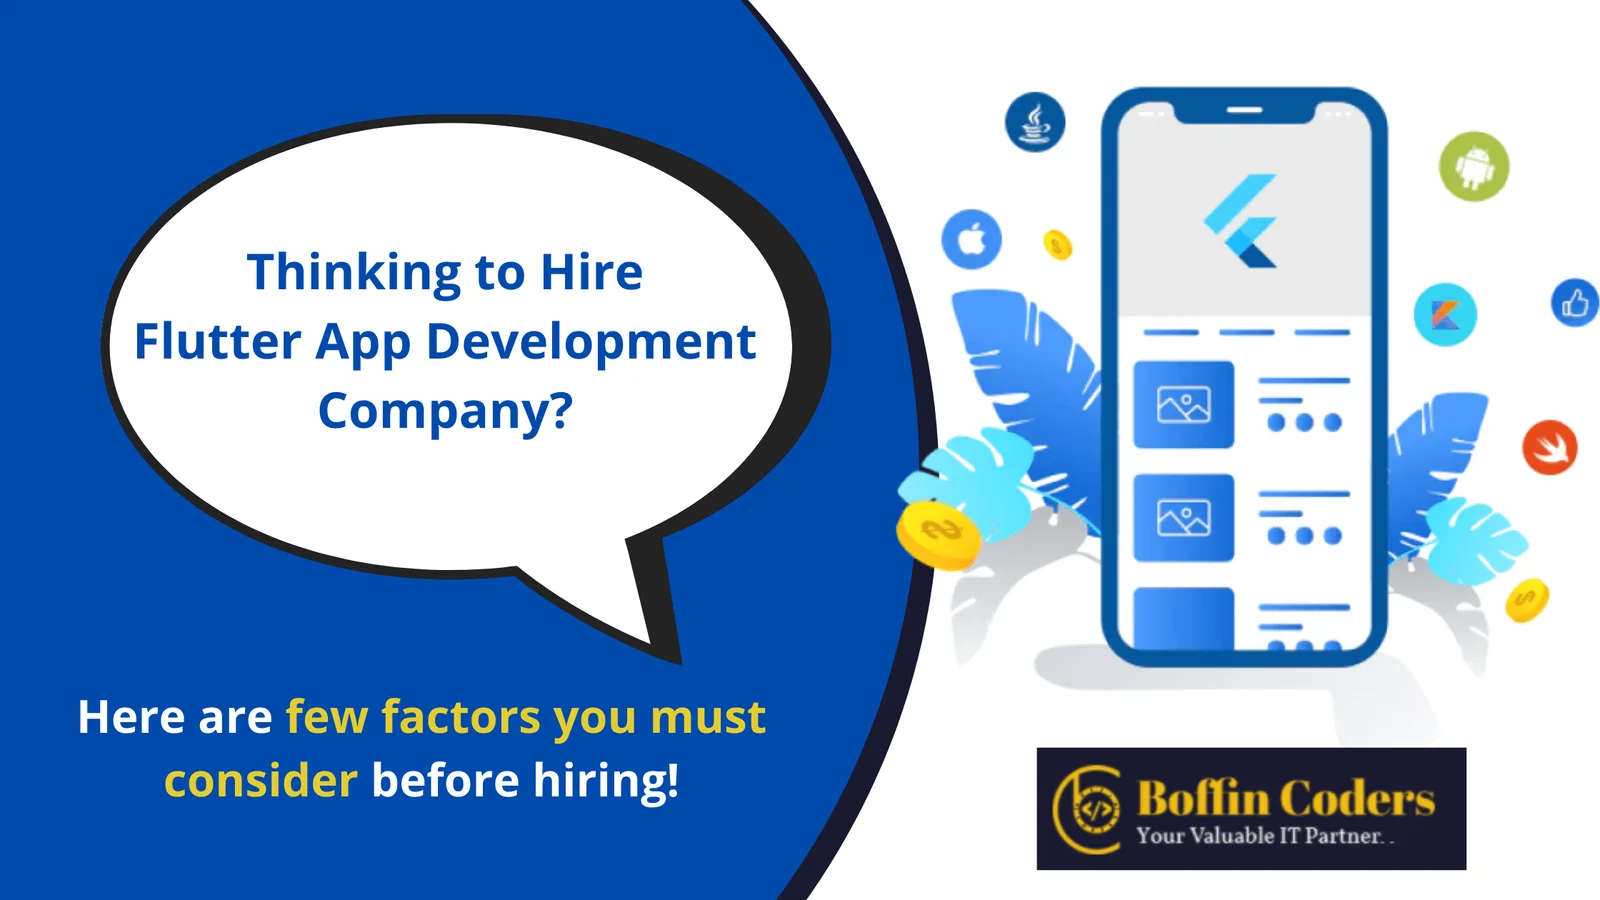 How To Hire A Flutter App Development Company? – The Complete Guide!